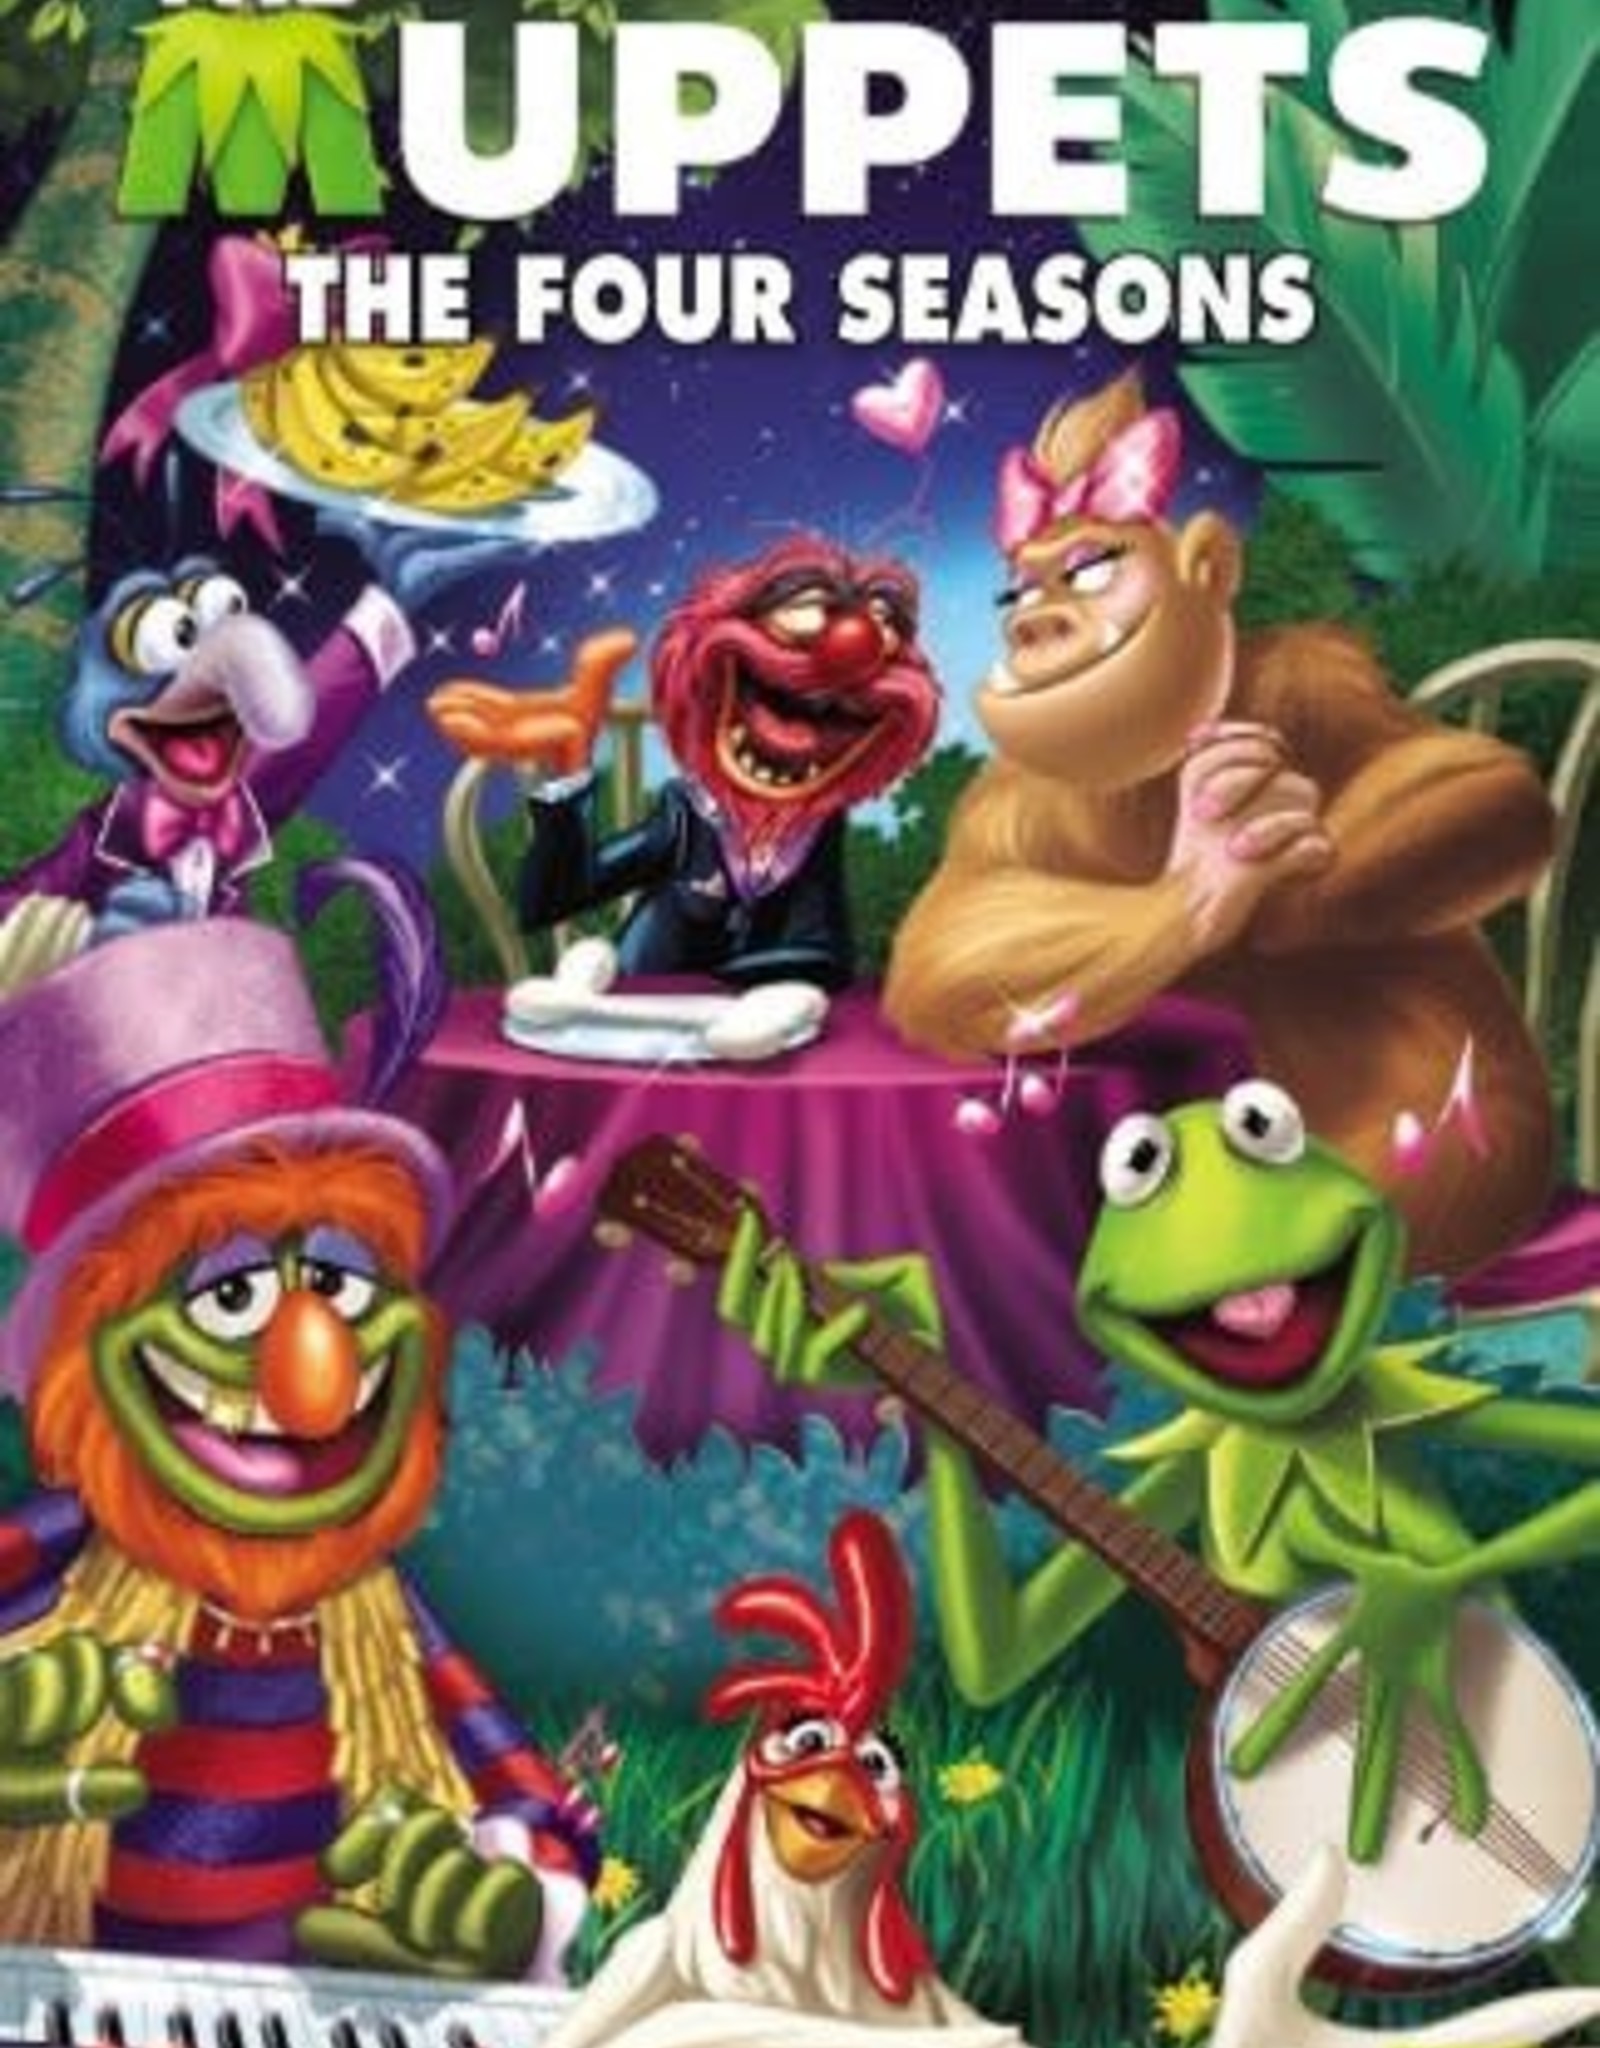 The Muppets: The Four Seasons